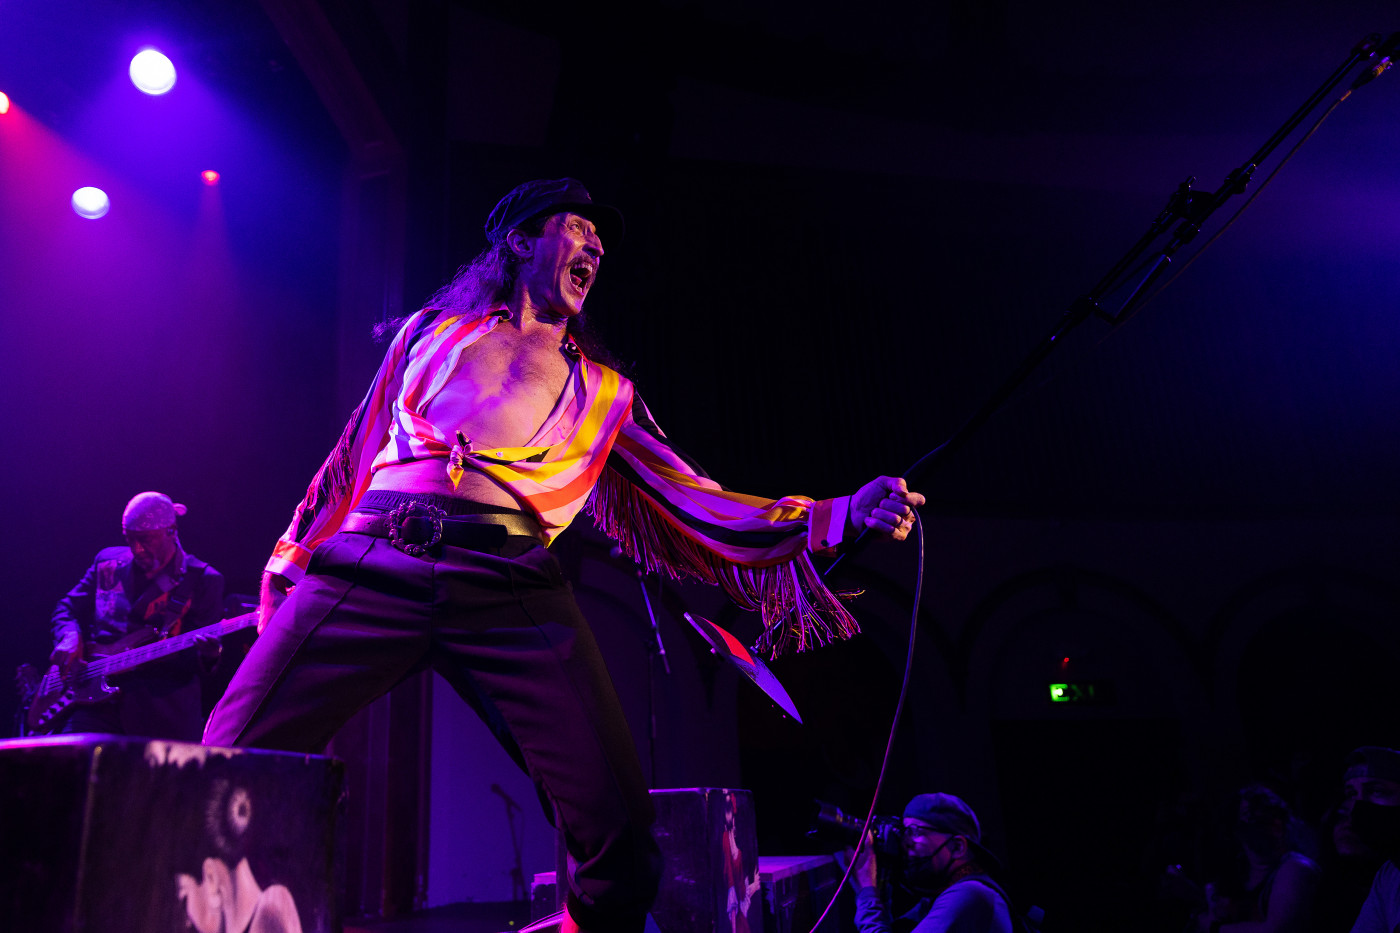 Gogol Bordello perform onstage at the Neptune Theatre in Seattle, WA on 28th August 2021